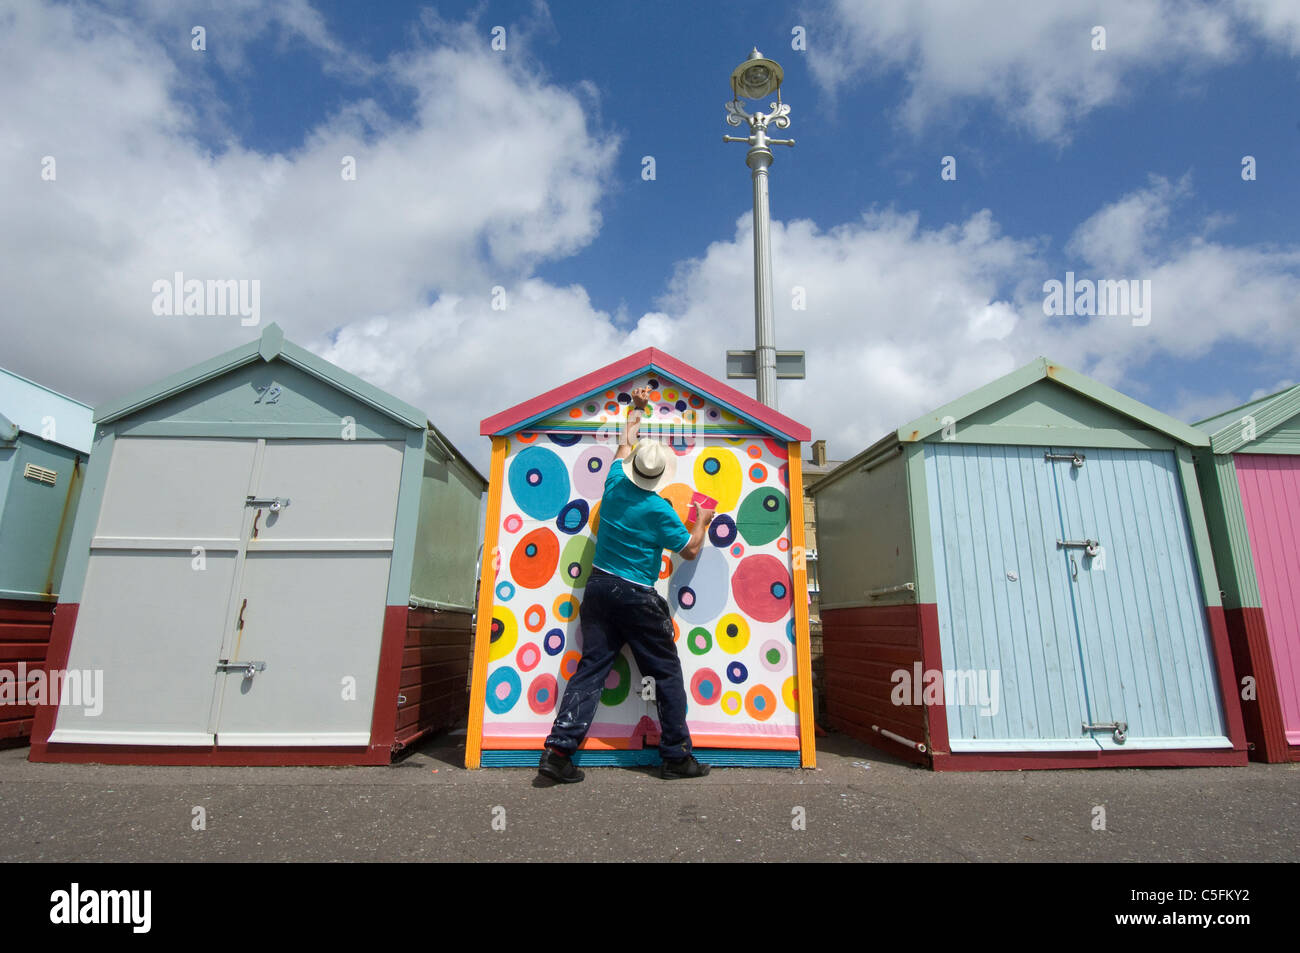 A middle aged man defying he rules and painting his Brighton beach hut in non-regulation colourful spots. Stock Photo